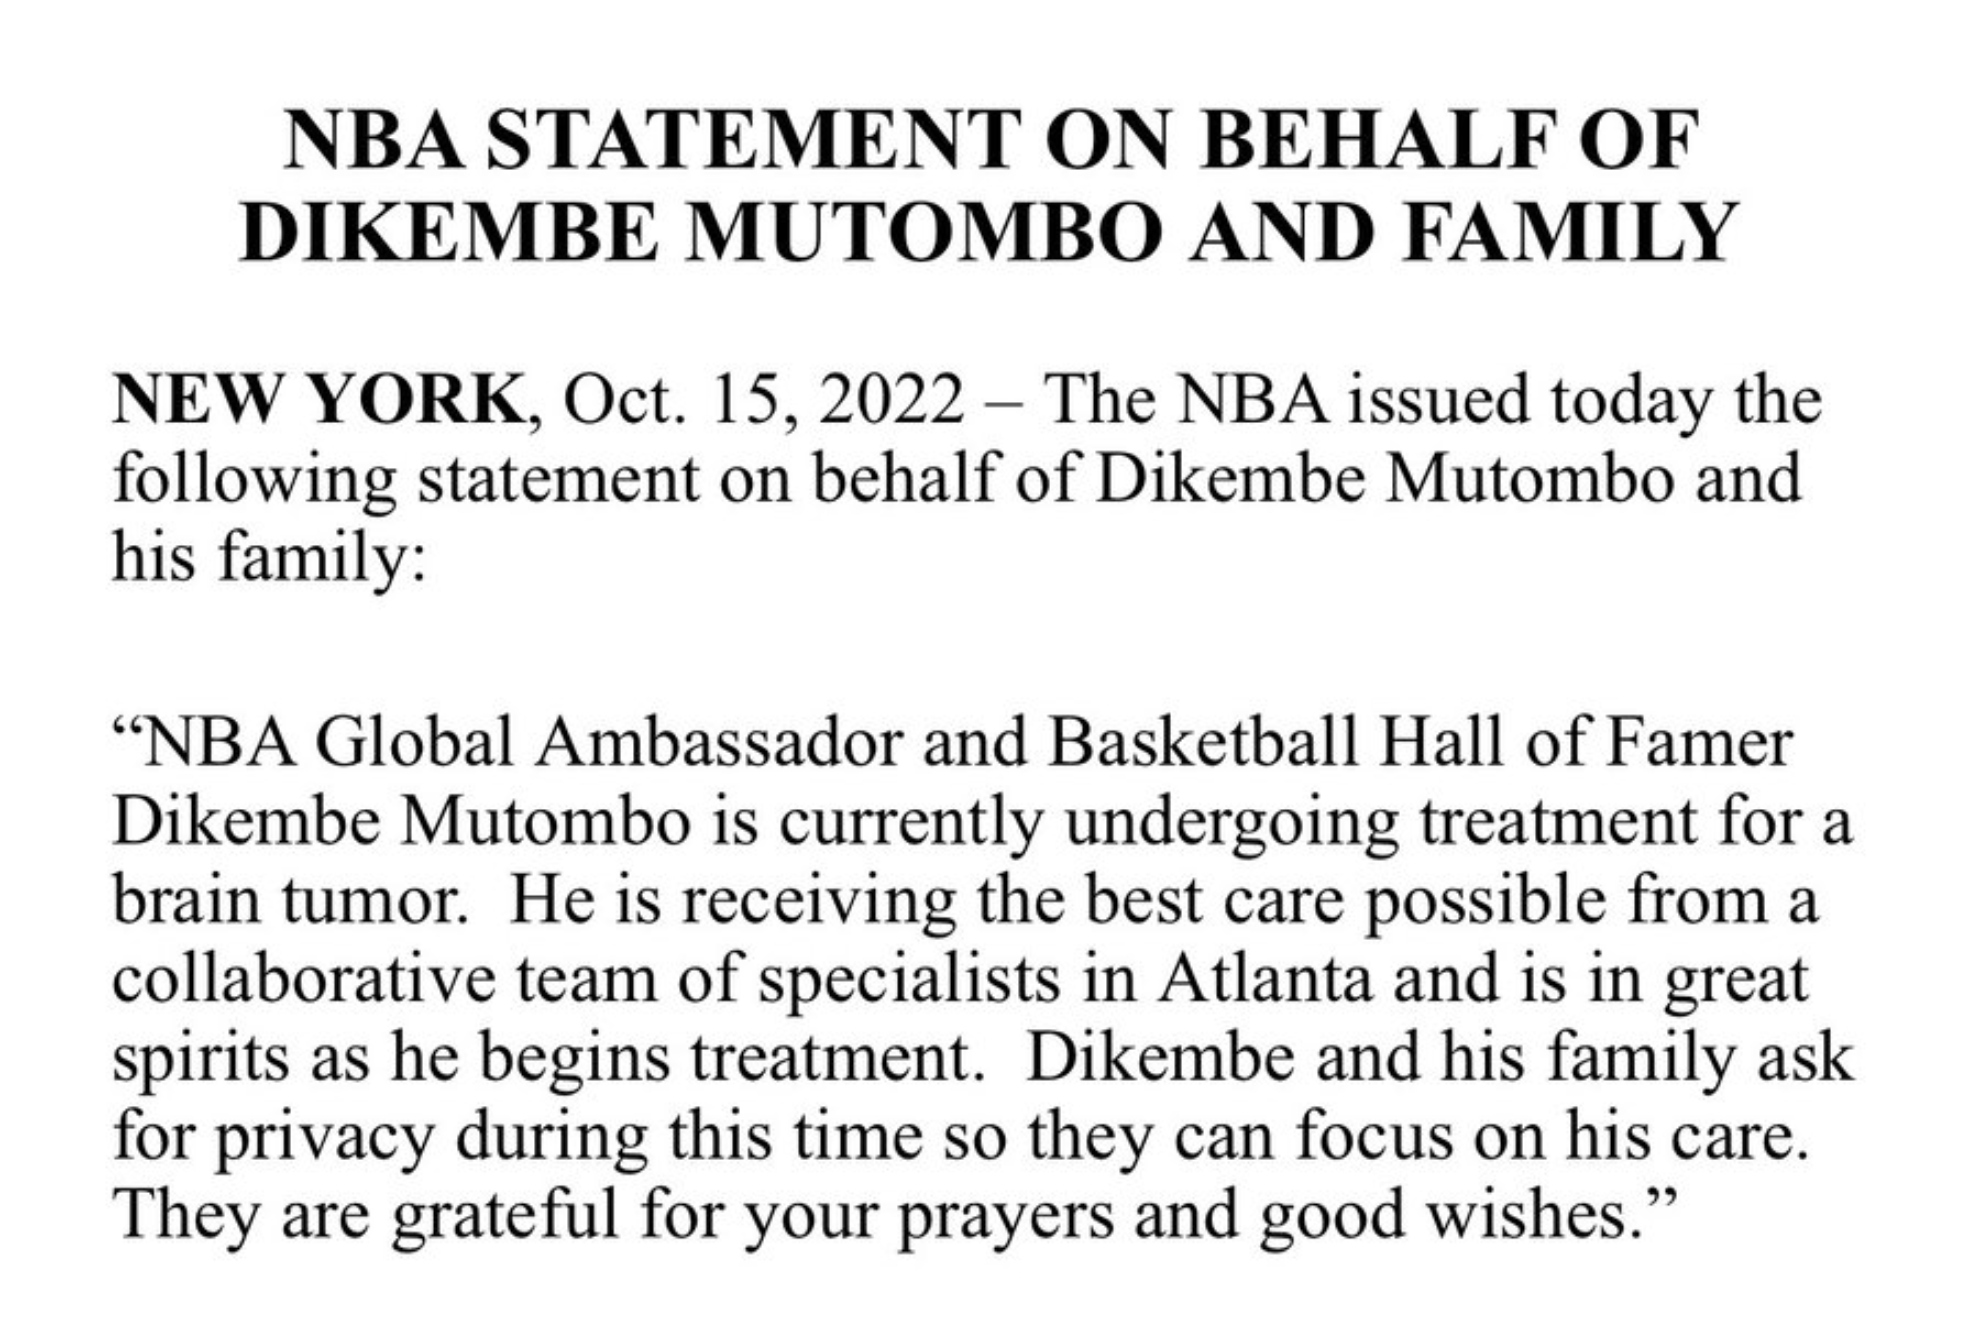 NBA Legend Dikembe Mutombo records Ebola messages to help US